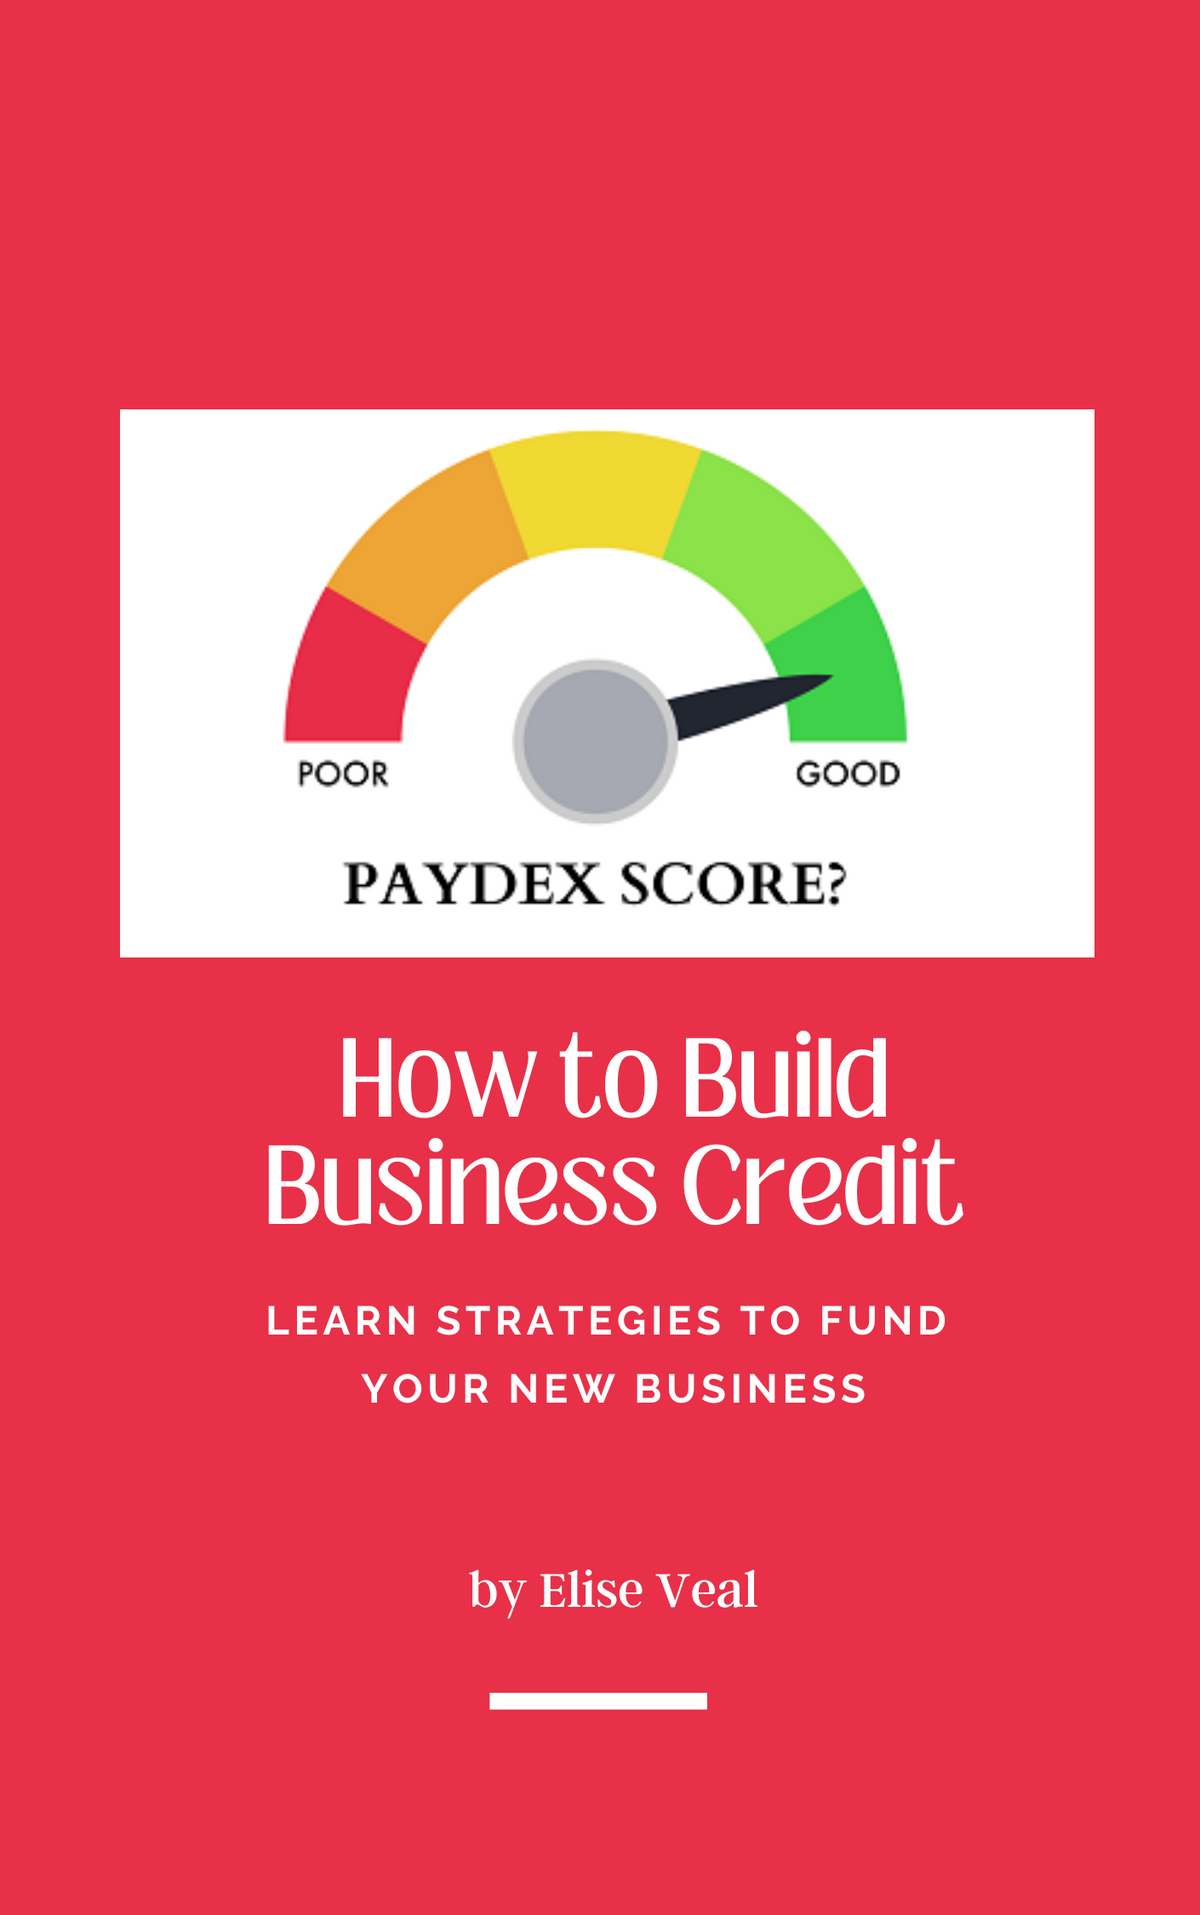 Learn how to build business credit, e-book